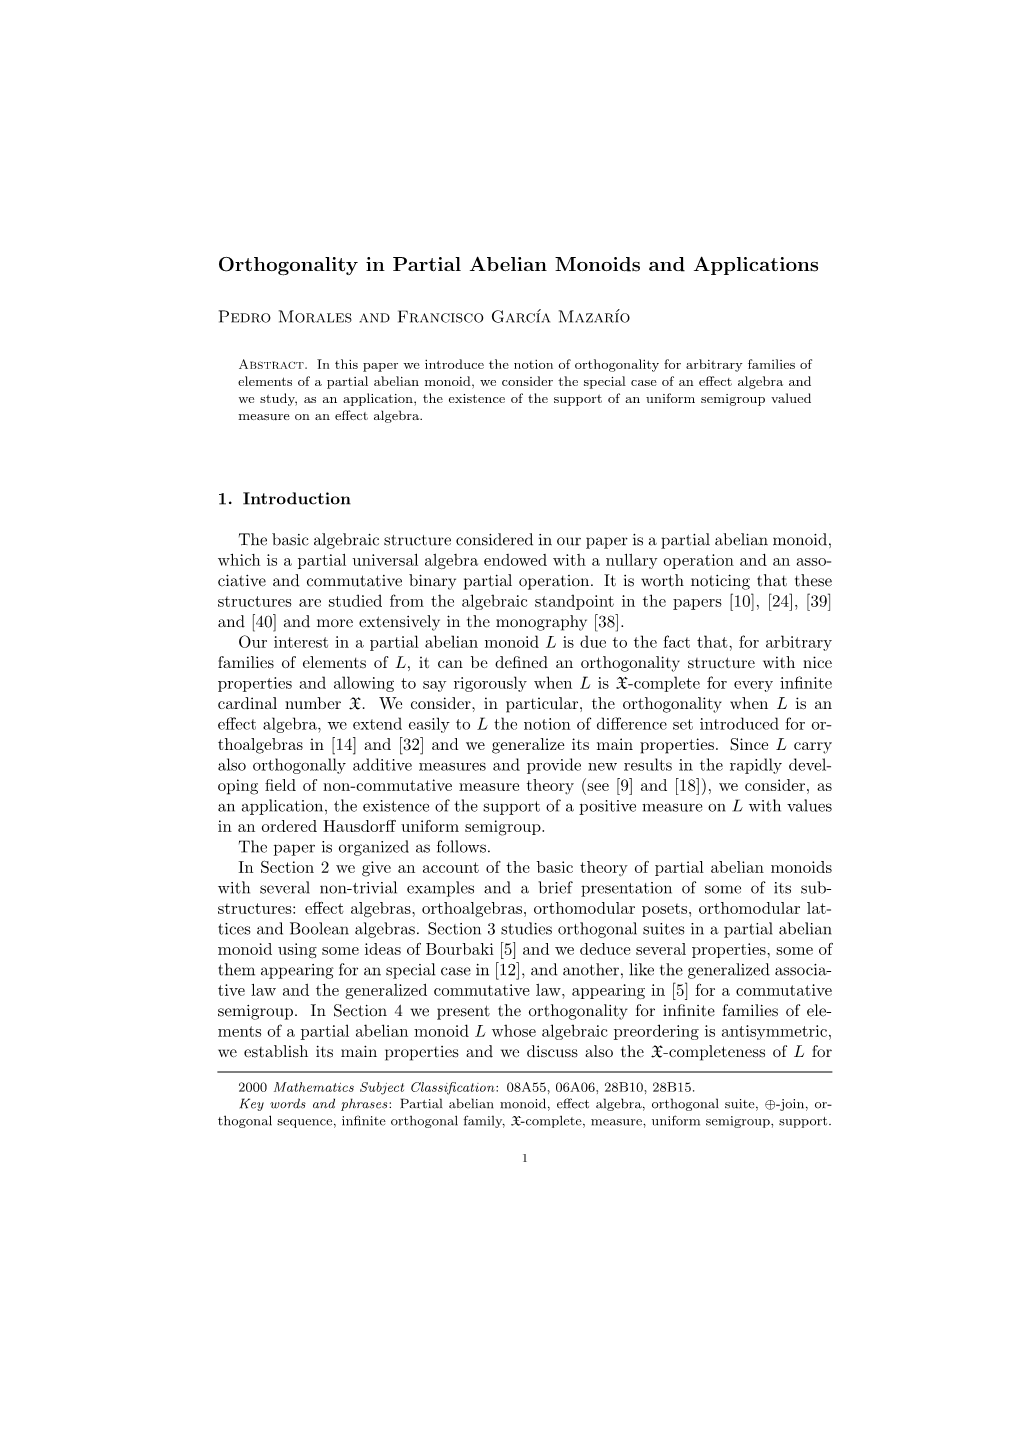 Orthogonality in Partial Abelian Monoids and Applications